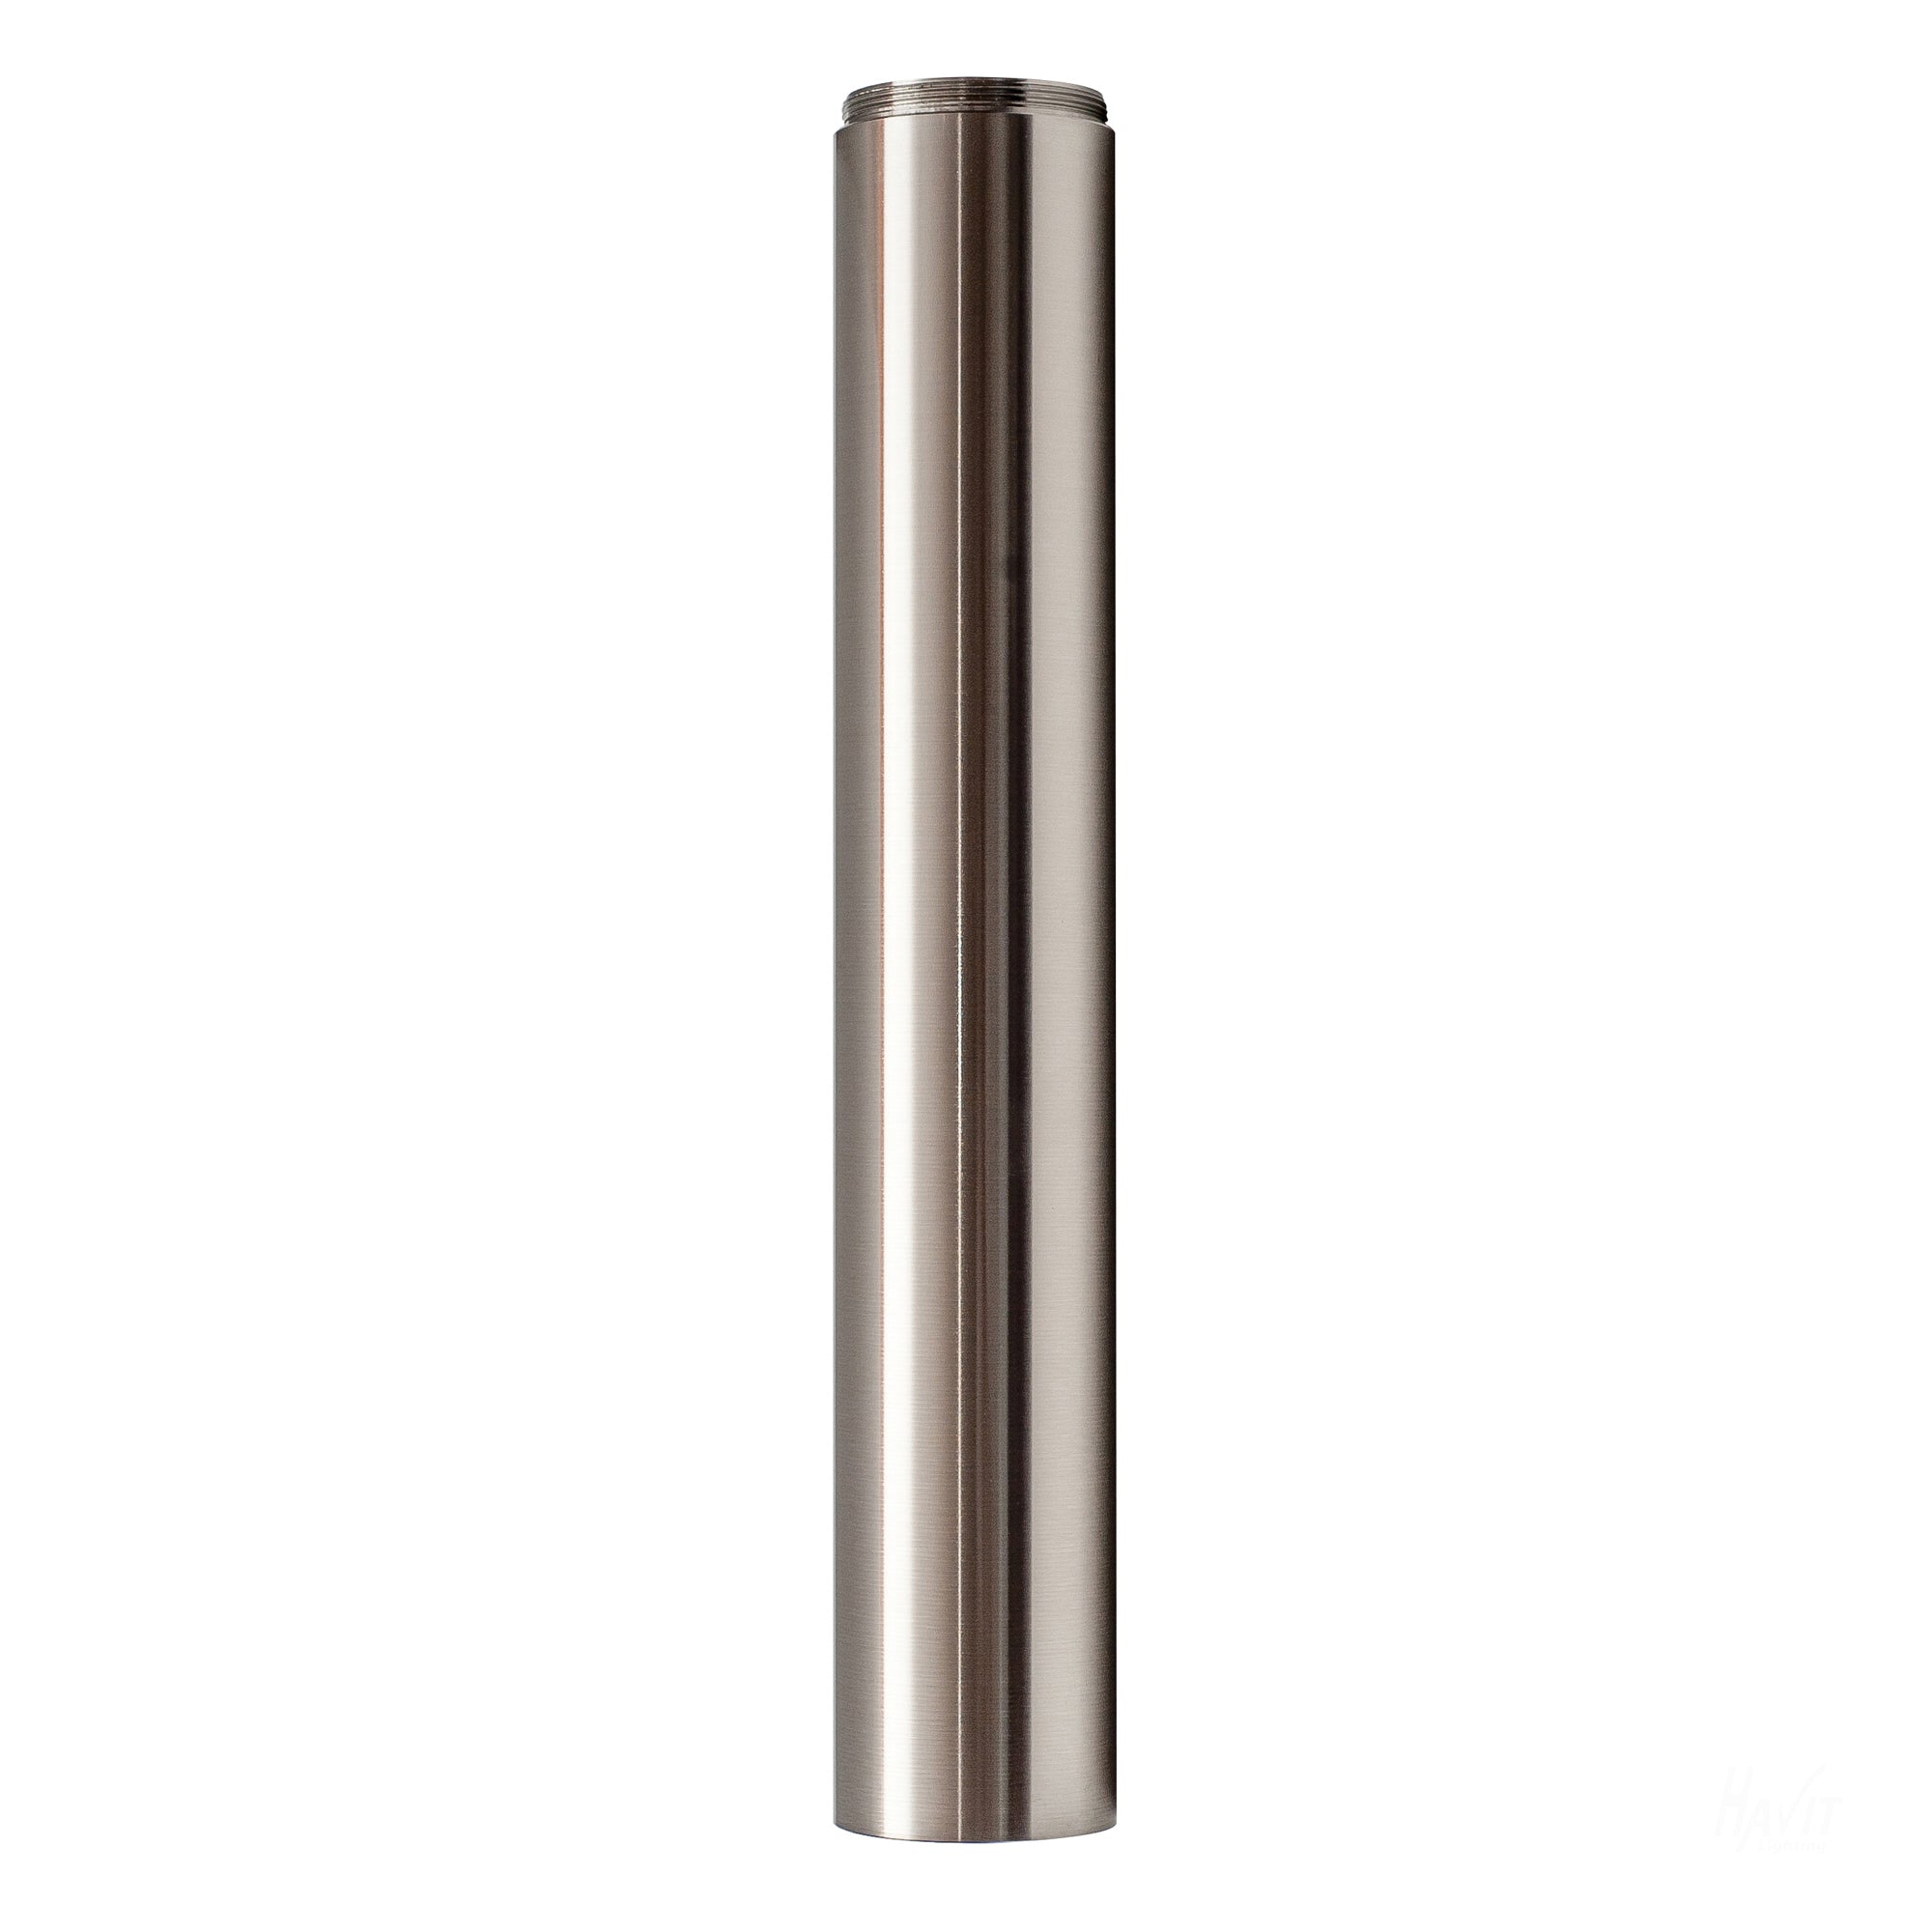 HV1603-SS316 - 316 Stainless Steel Bollard Extension to suit HV1601T-SS316 & HV1602T-SS316